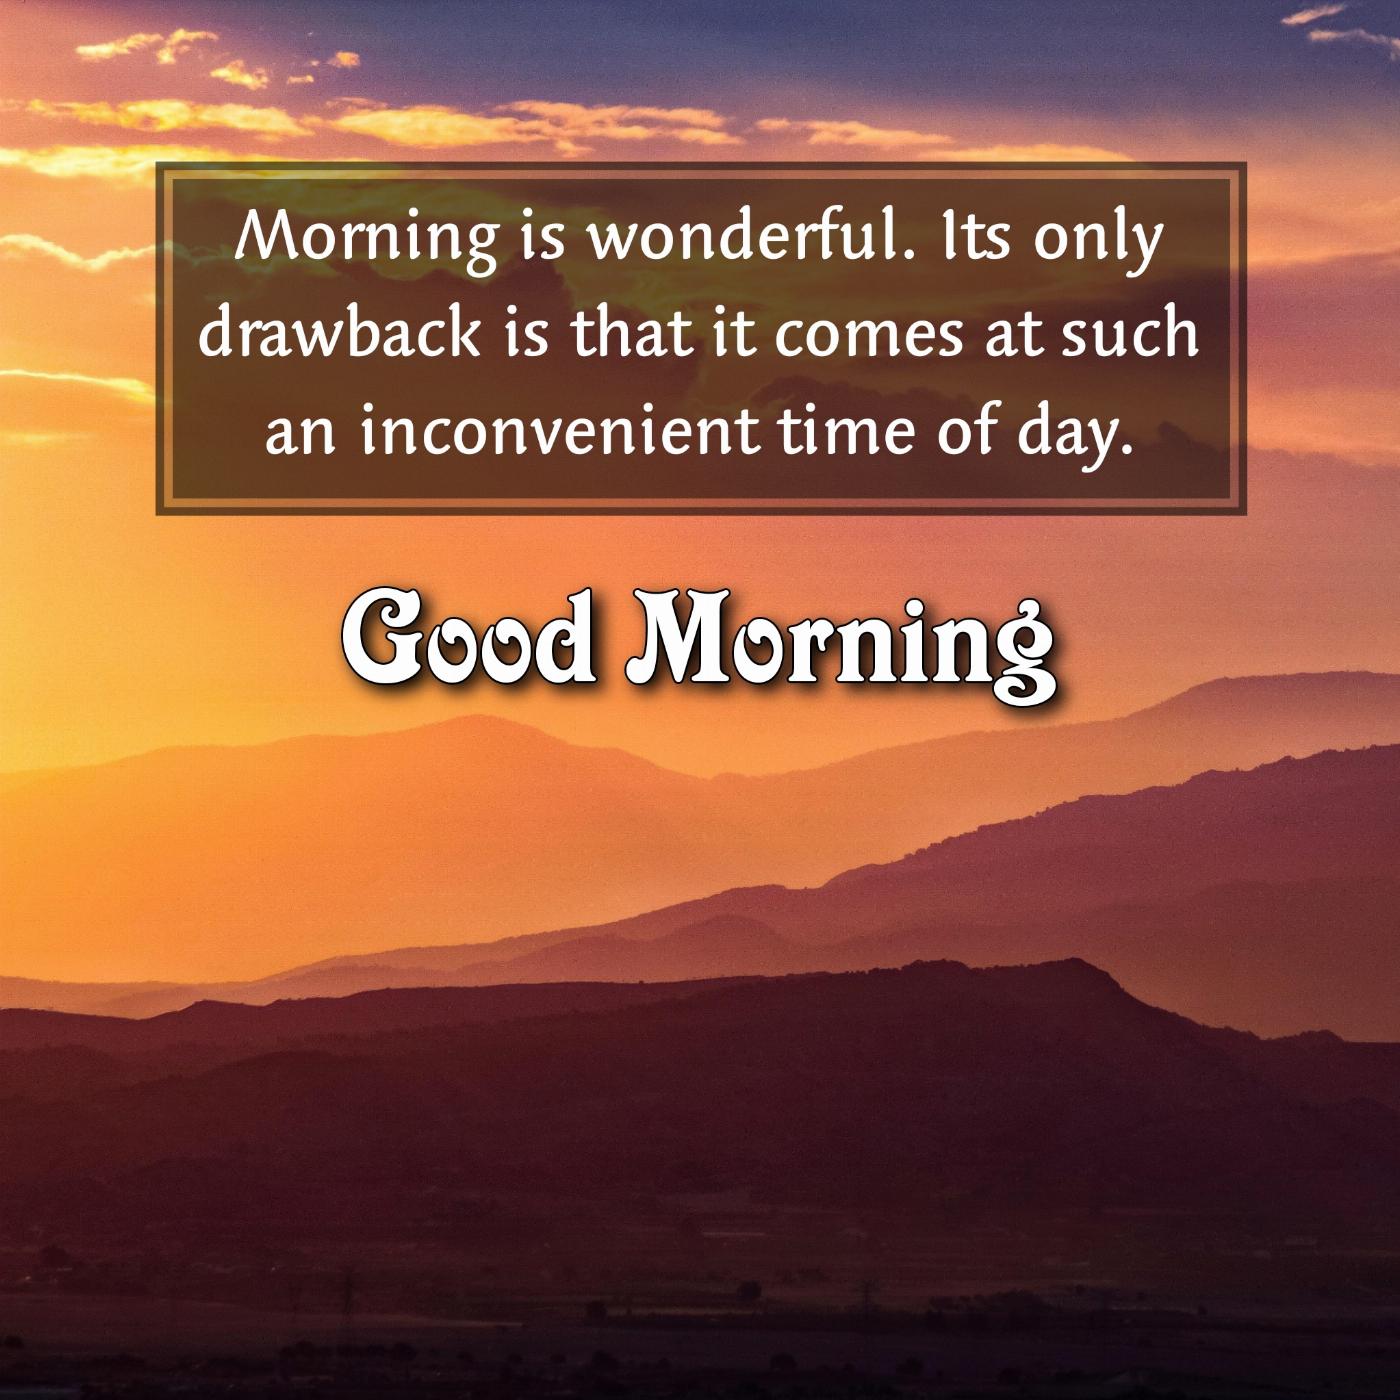 Morning is wonderful Its only drawback is that it comes